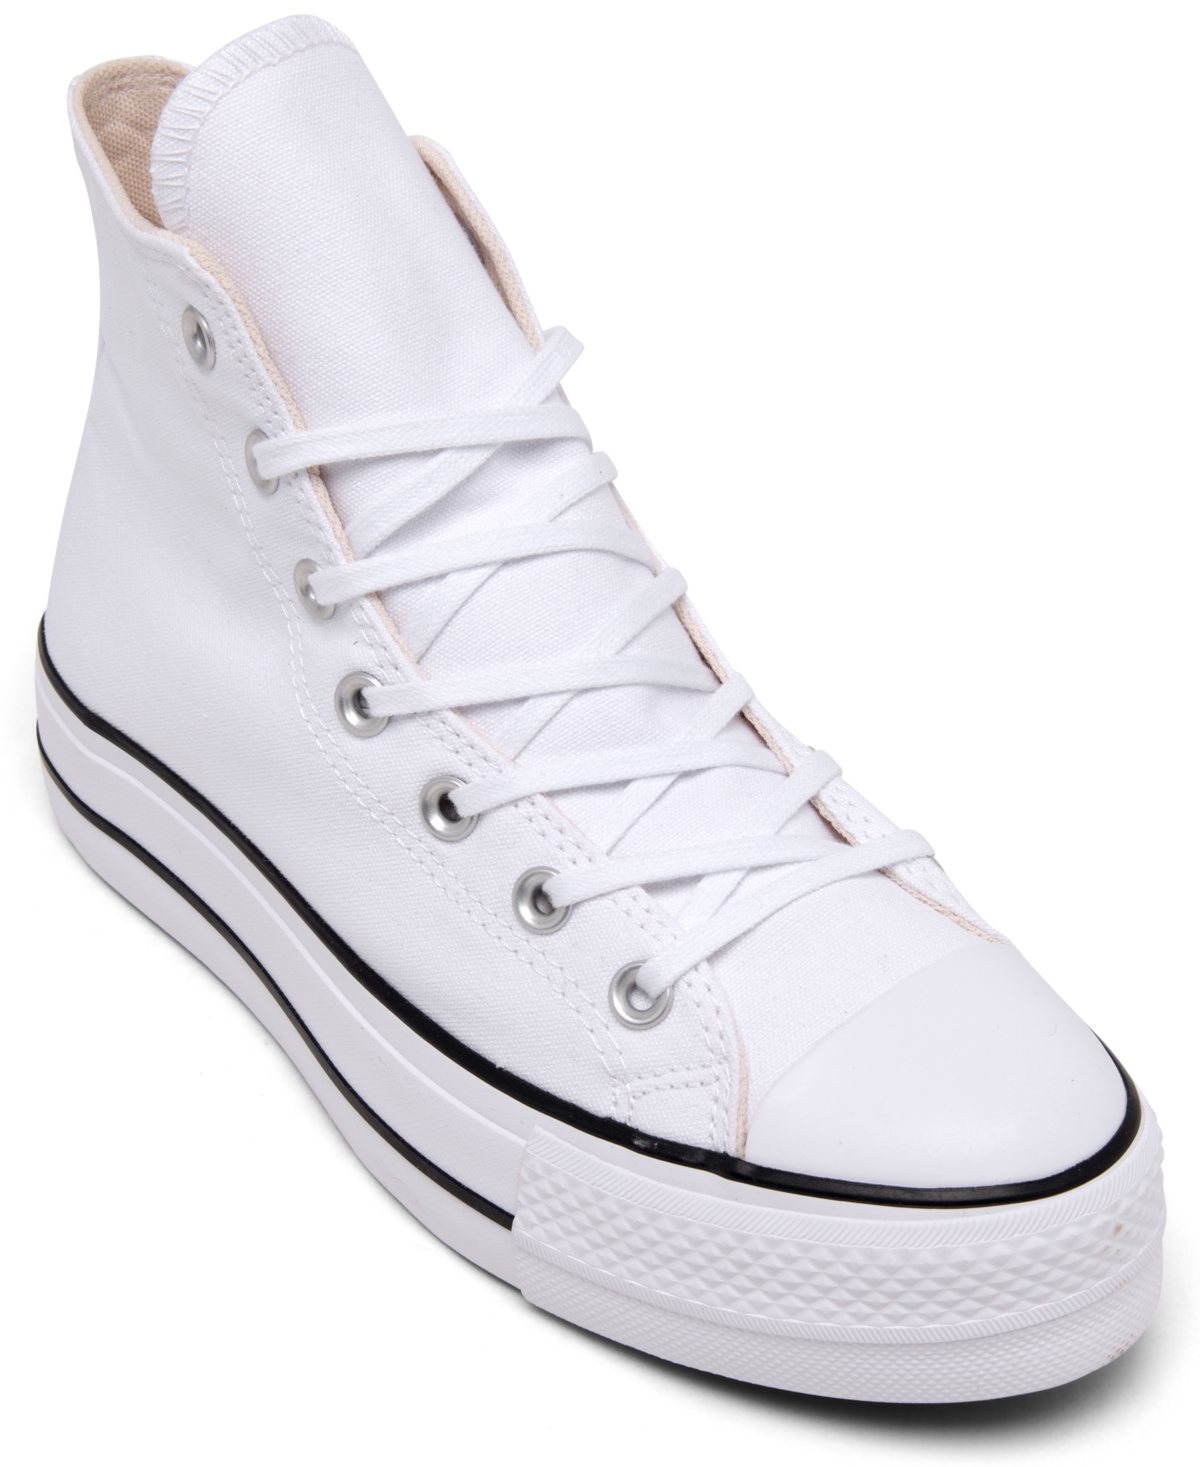 Women's Chuck Taylor All Star Lift Platform High Top Casual Sneakers from Finish Line - Legend Berry, White, Black